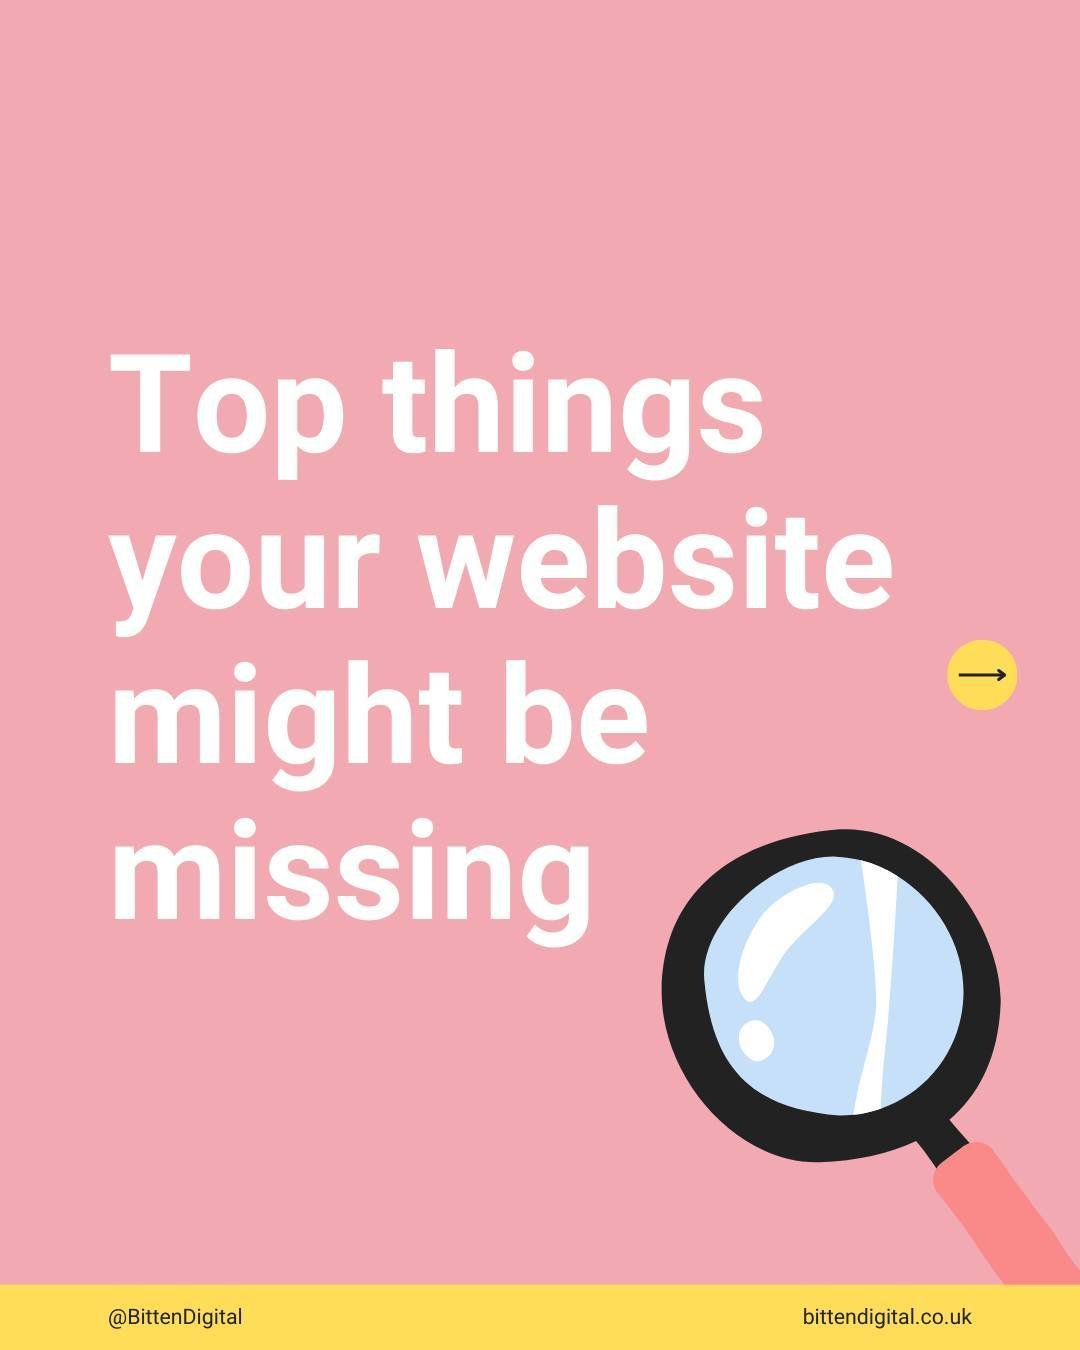 Hate to give you the Monday scaries, but your website might be missing these:

👉  An About page
Of course we want to hear about your brand! Your backstory, what you're about, who you are, where you're based - we're nosey and we want to feel connecte